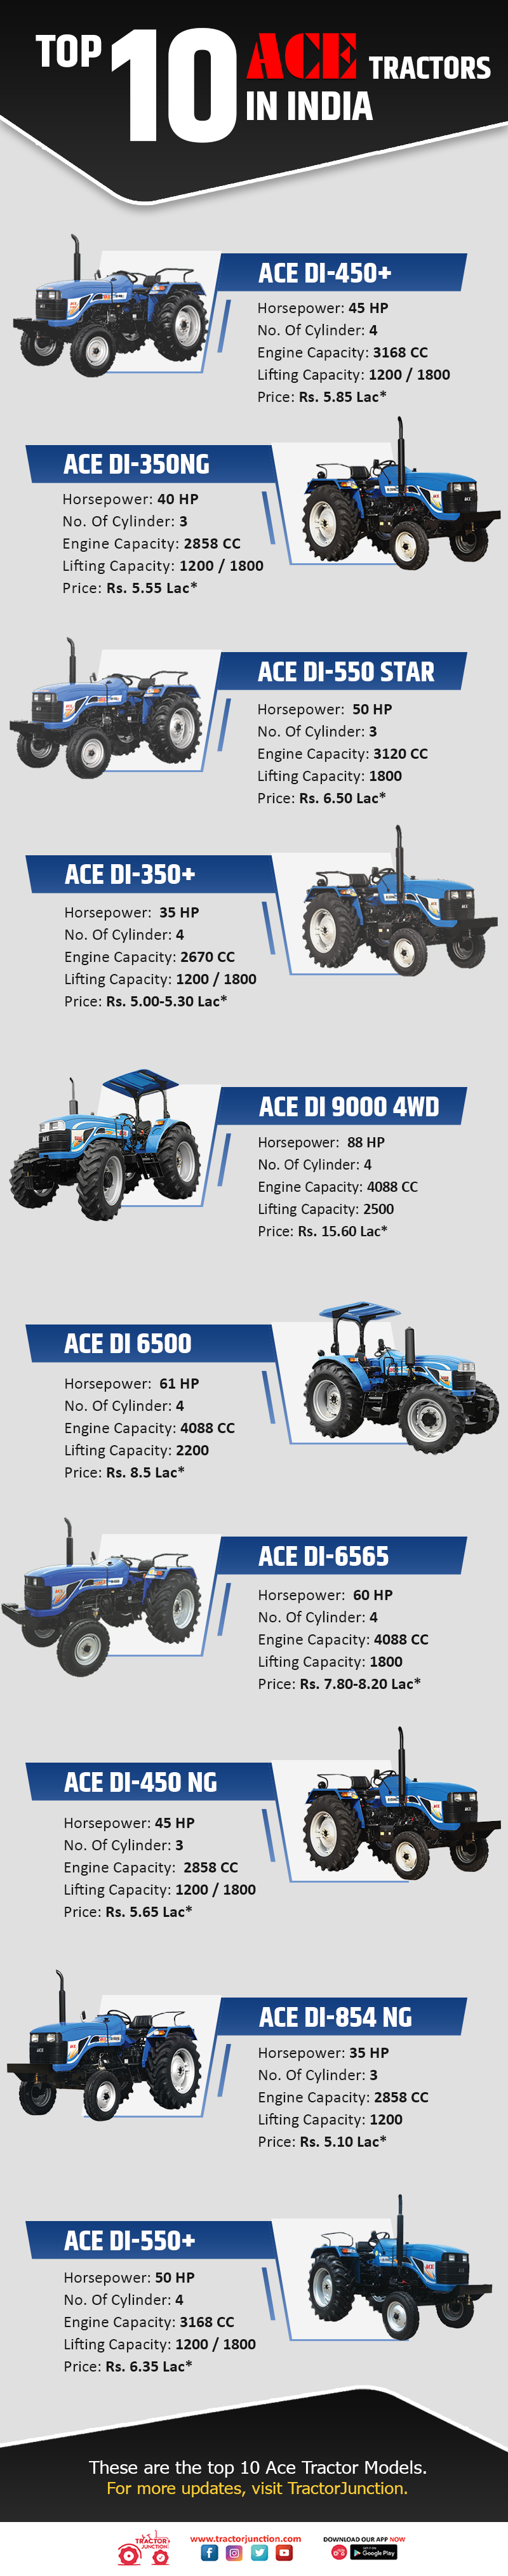 Top 10 Ace Tractor Models in India - Infographic 